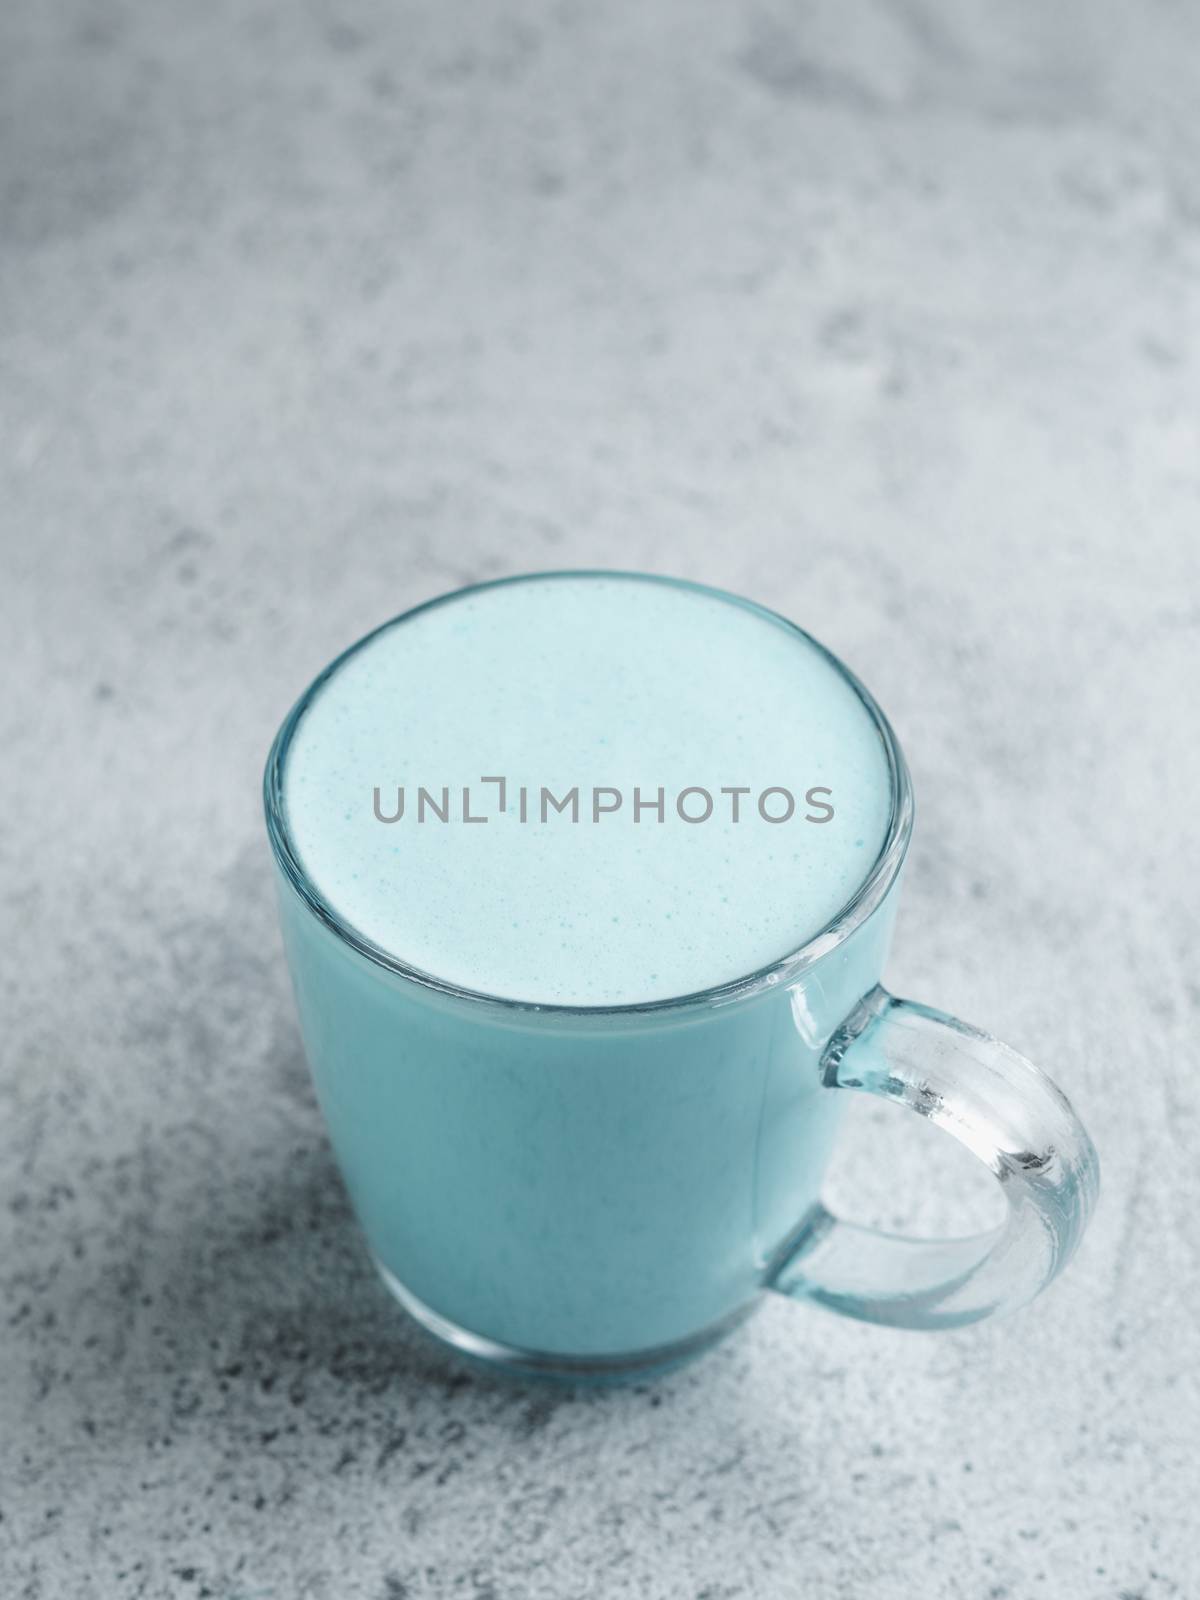 Trendy drink: Blue latte. Top view of hot butterfly pea latte or blue spirulina latte on gray cement textured background. Copy space for text.